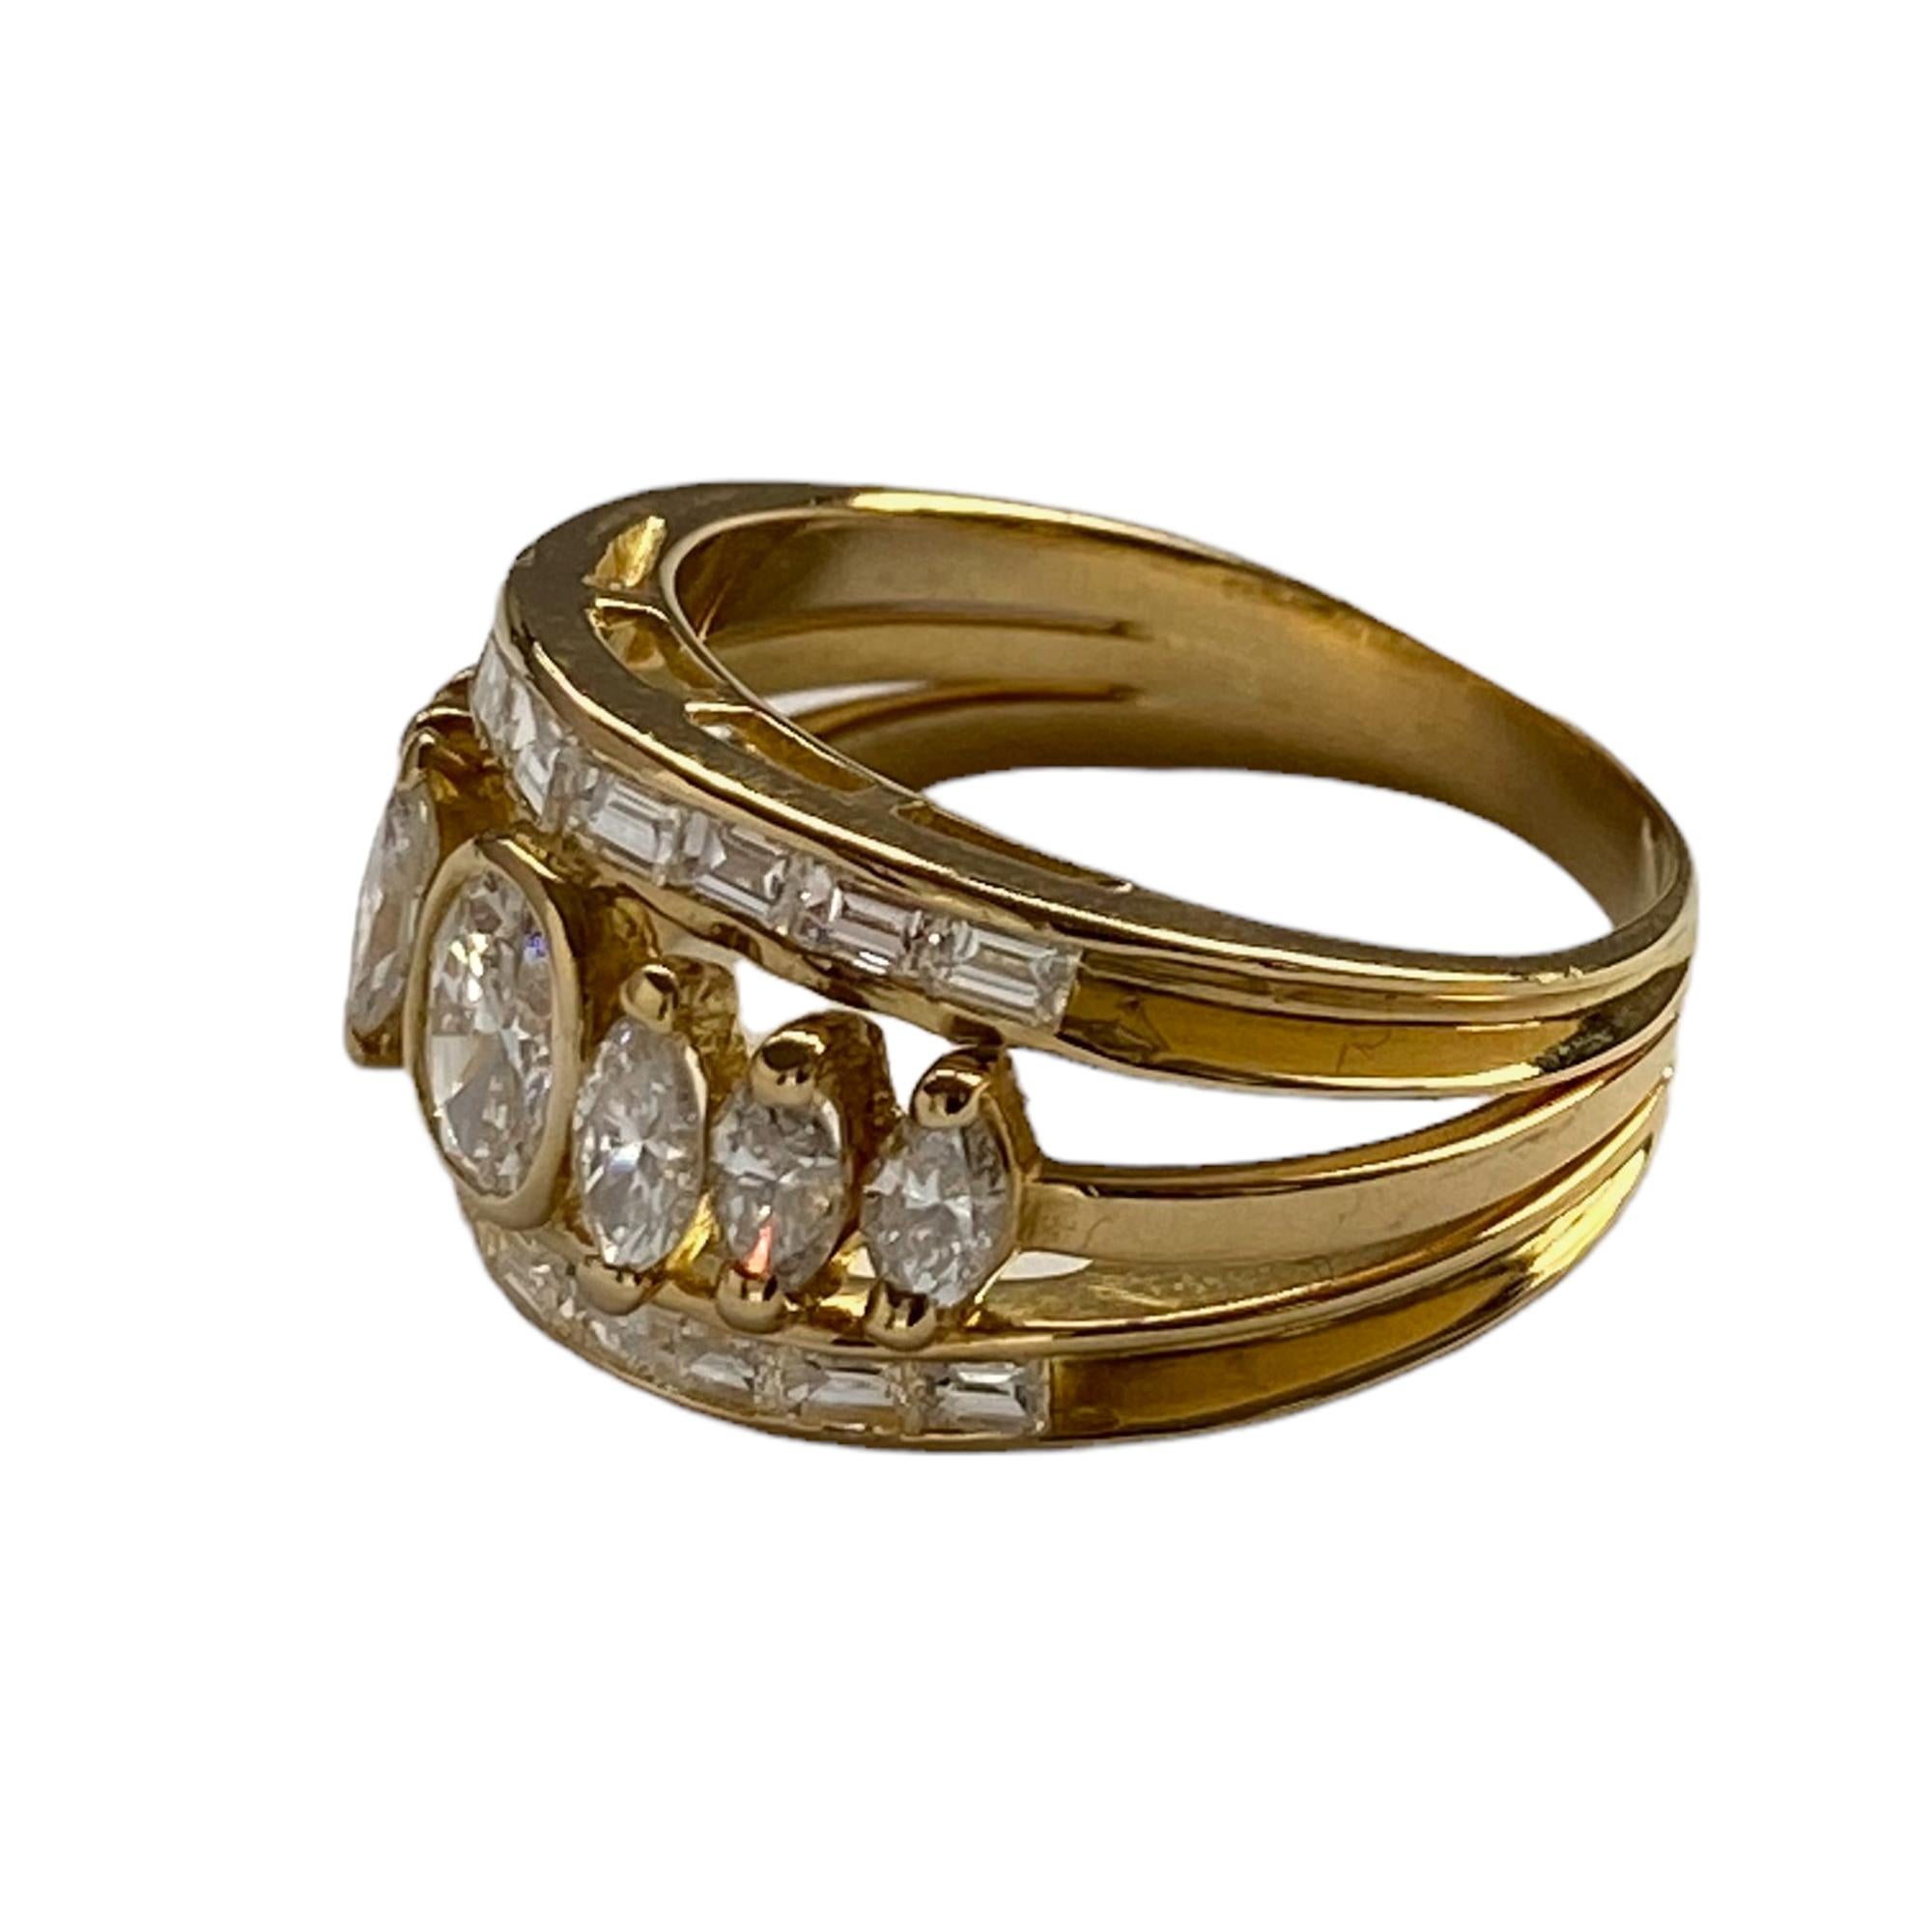 Oval Cut Special Band Ring with Natural White Diamonds - 18kt Yellow Gold 